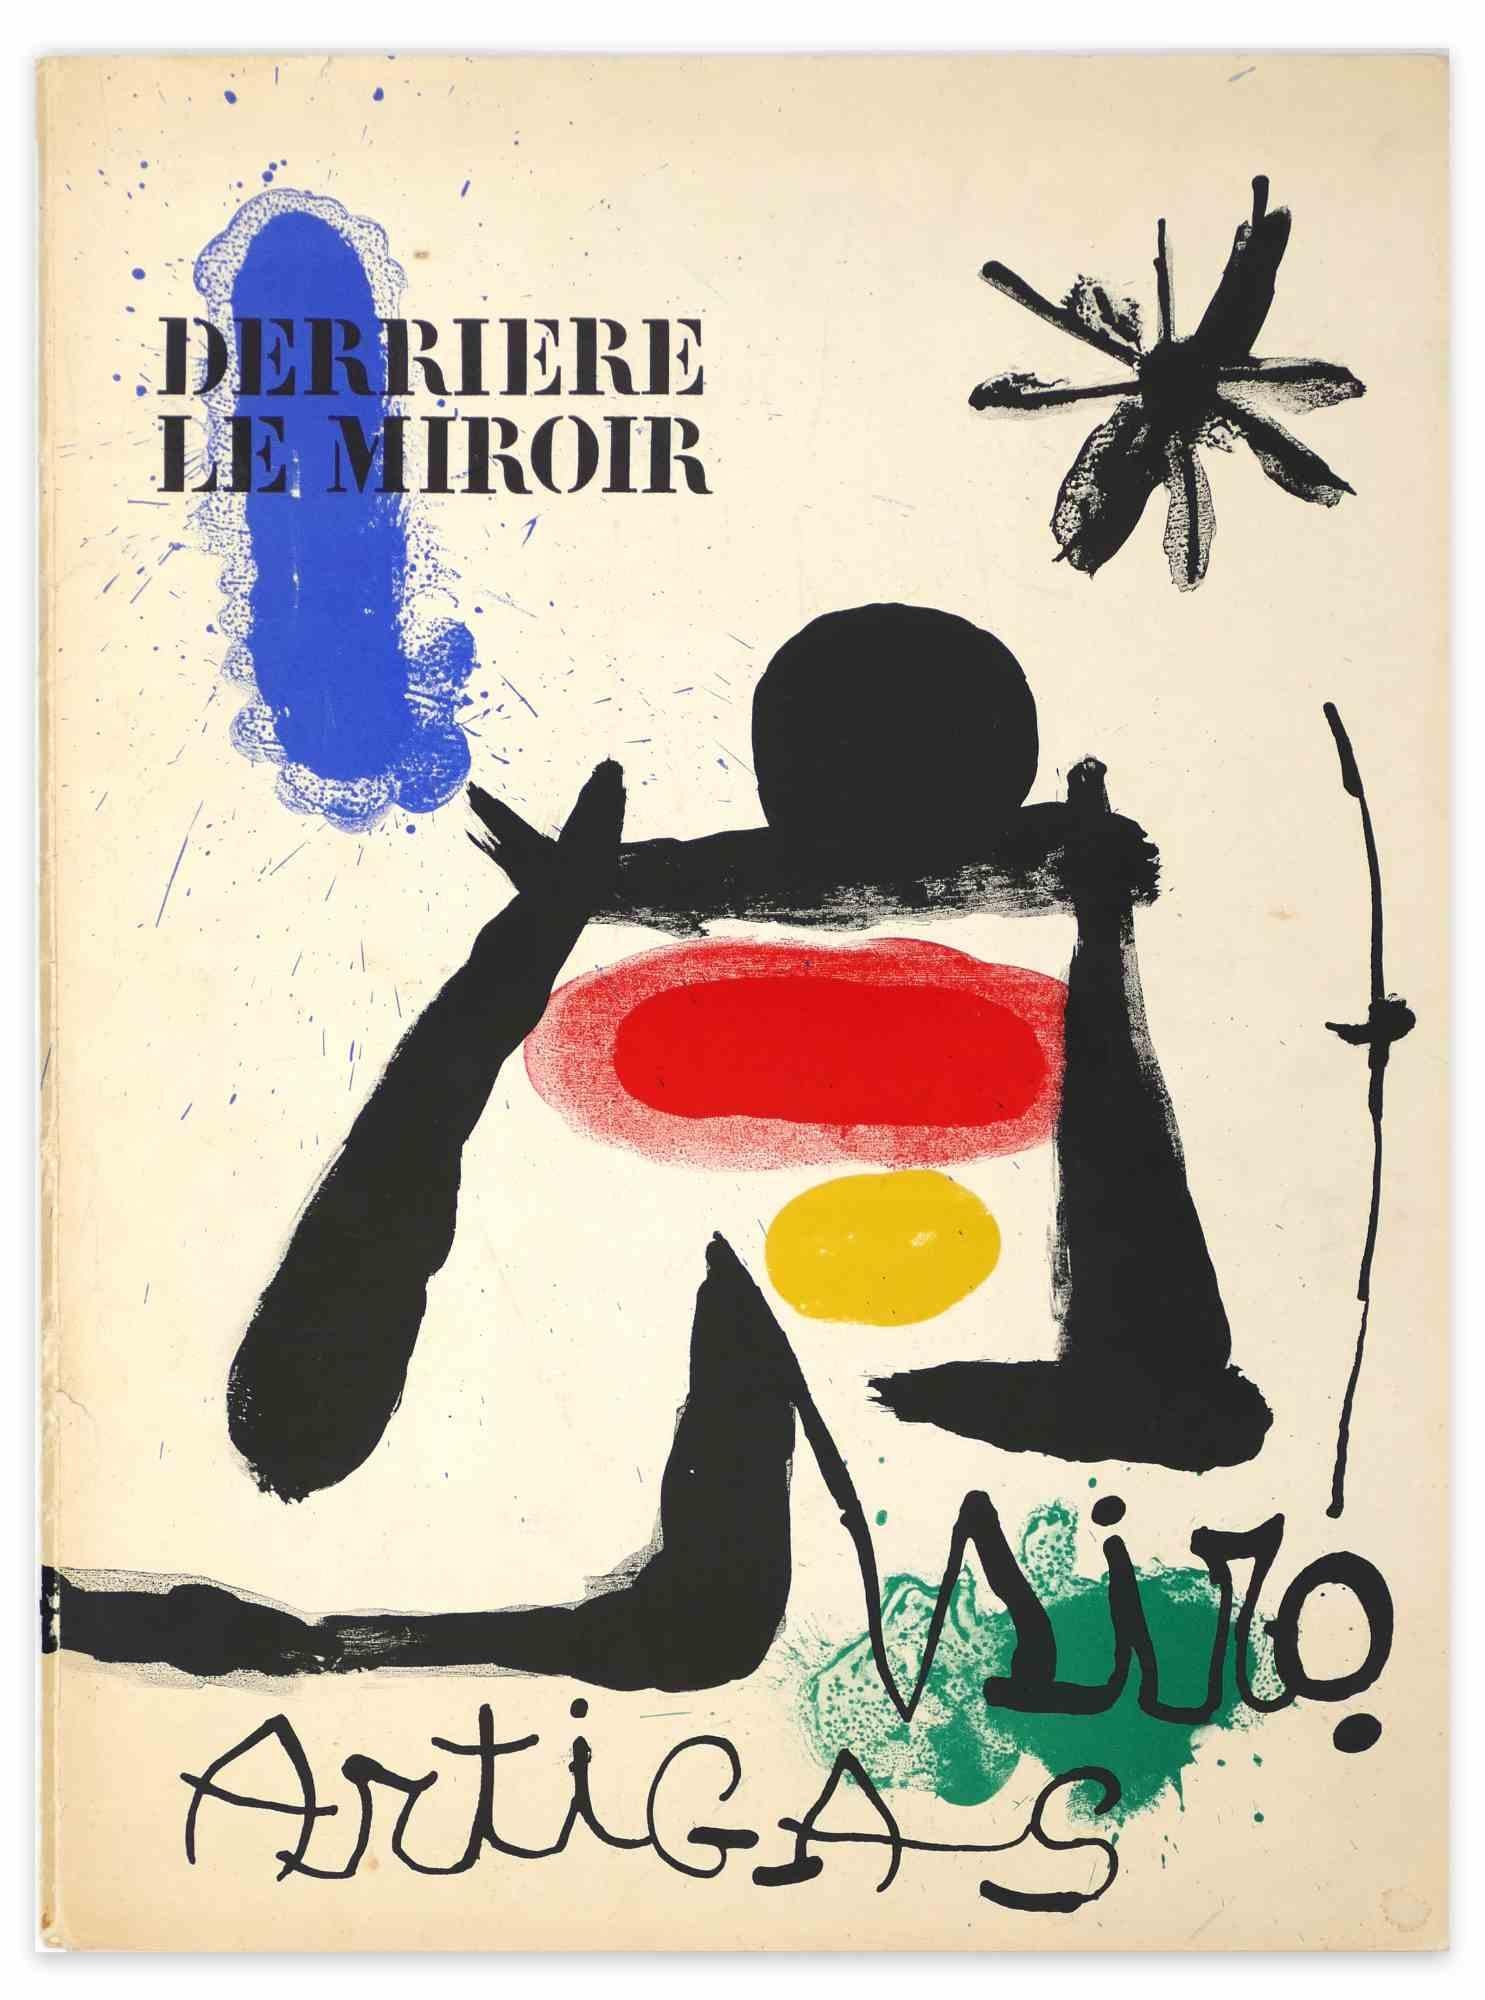 Cover for Derrière Le Miroir - Lithograph by Joan Mirò - 1963 - Abstract Print by Joan Miró